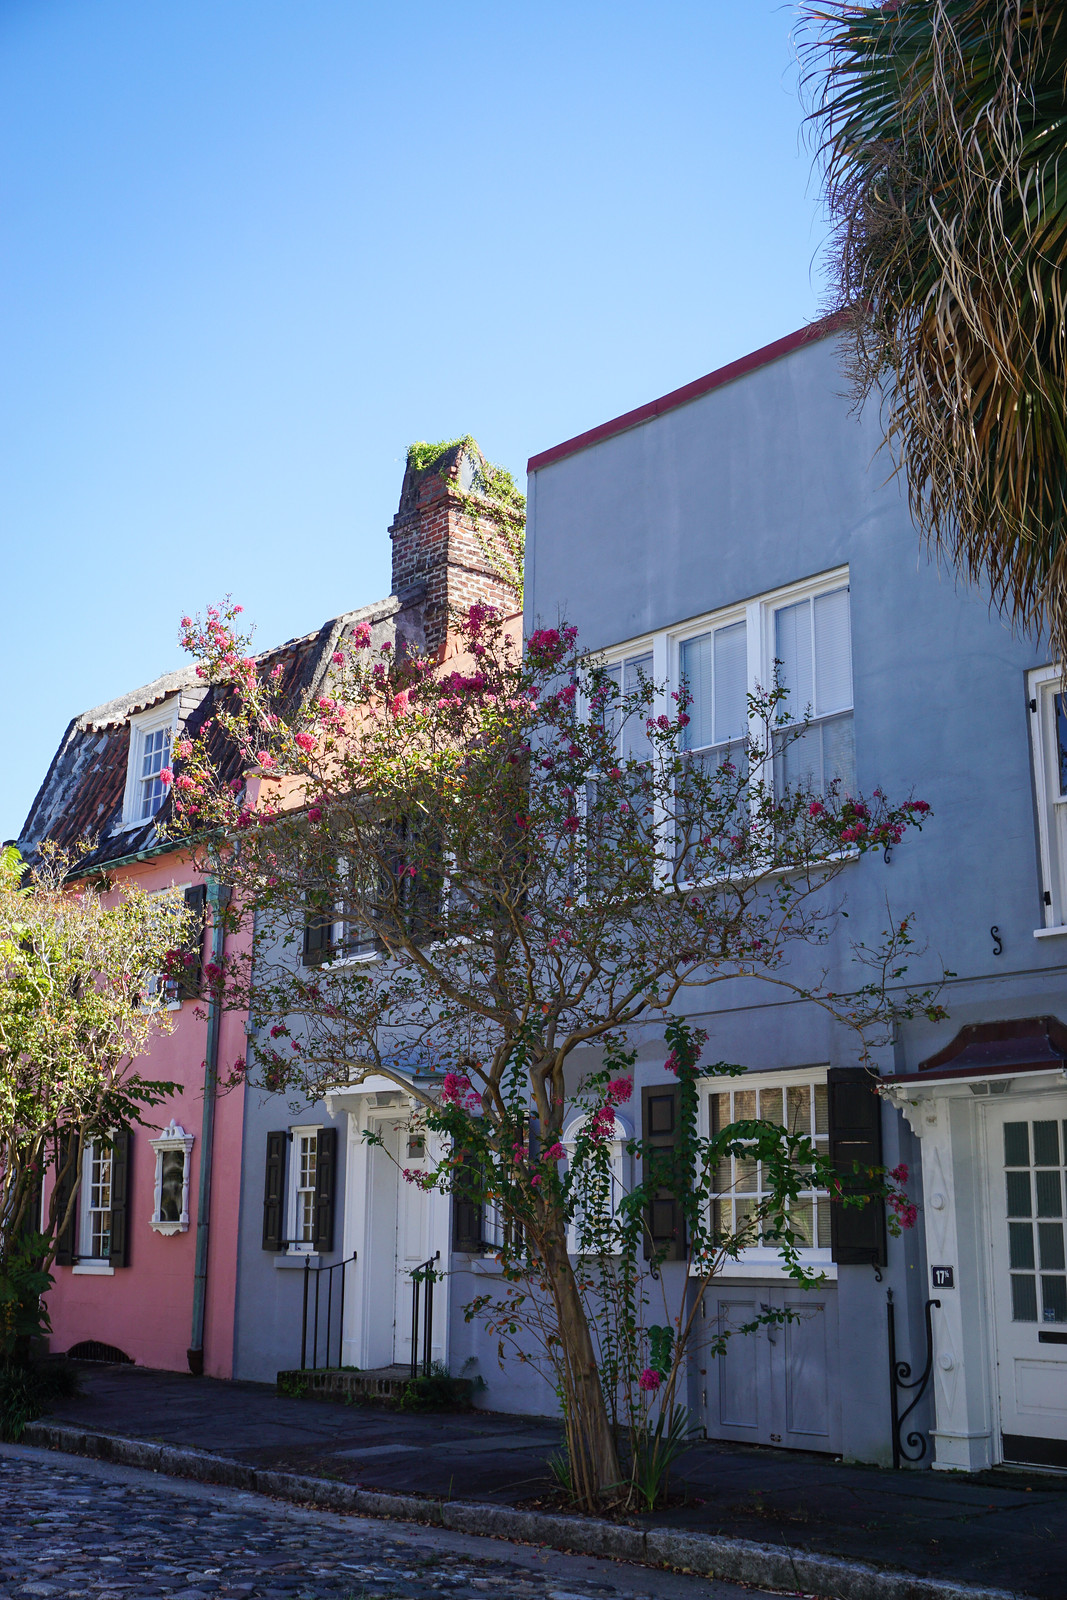  The Pink House on Chalmers St Cobblestone Street in Charleston 